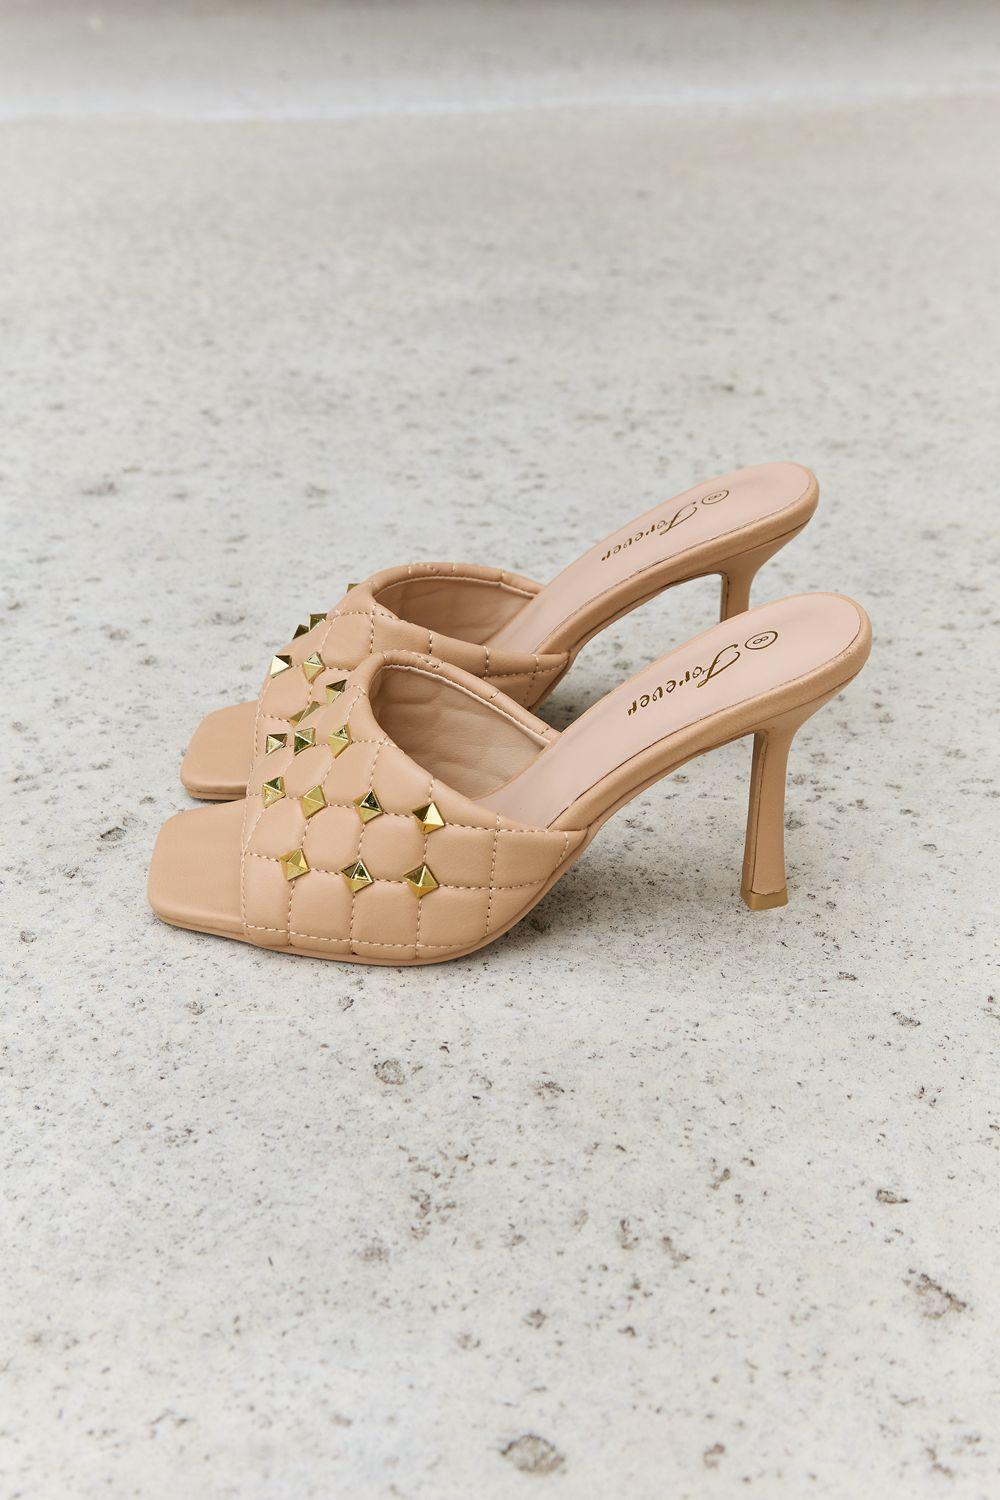 Forever Link Square Toe Quilted Mule Heels in Nude - Closet of Ren